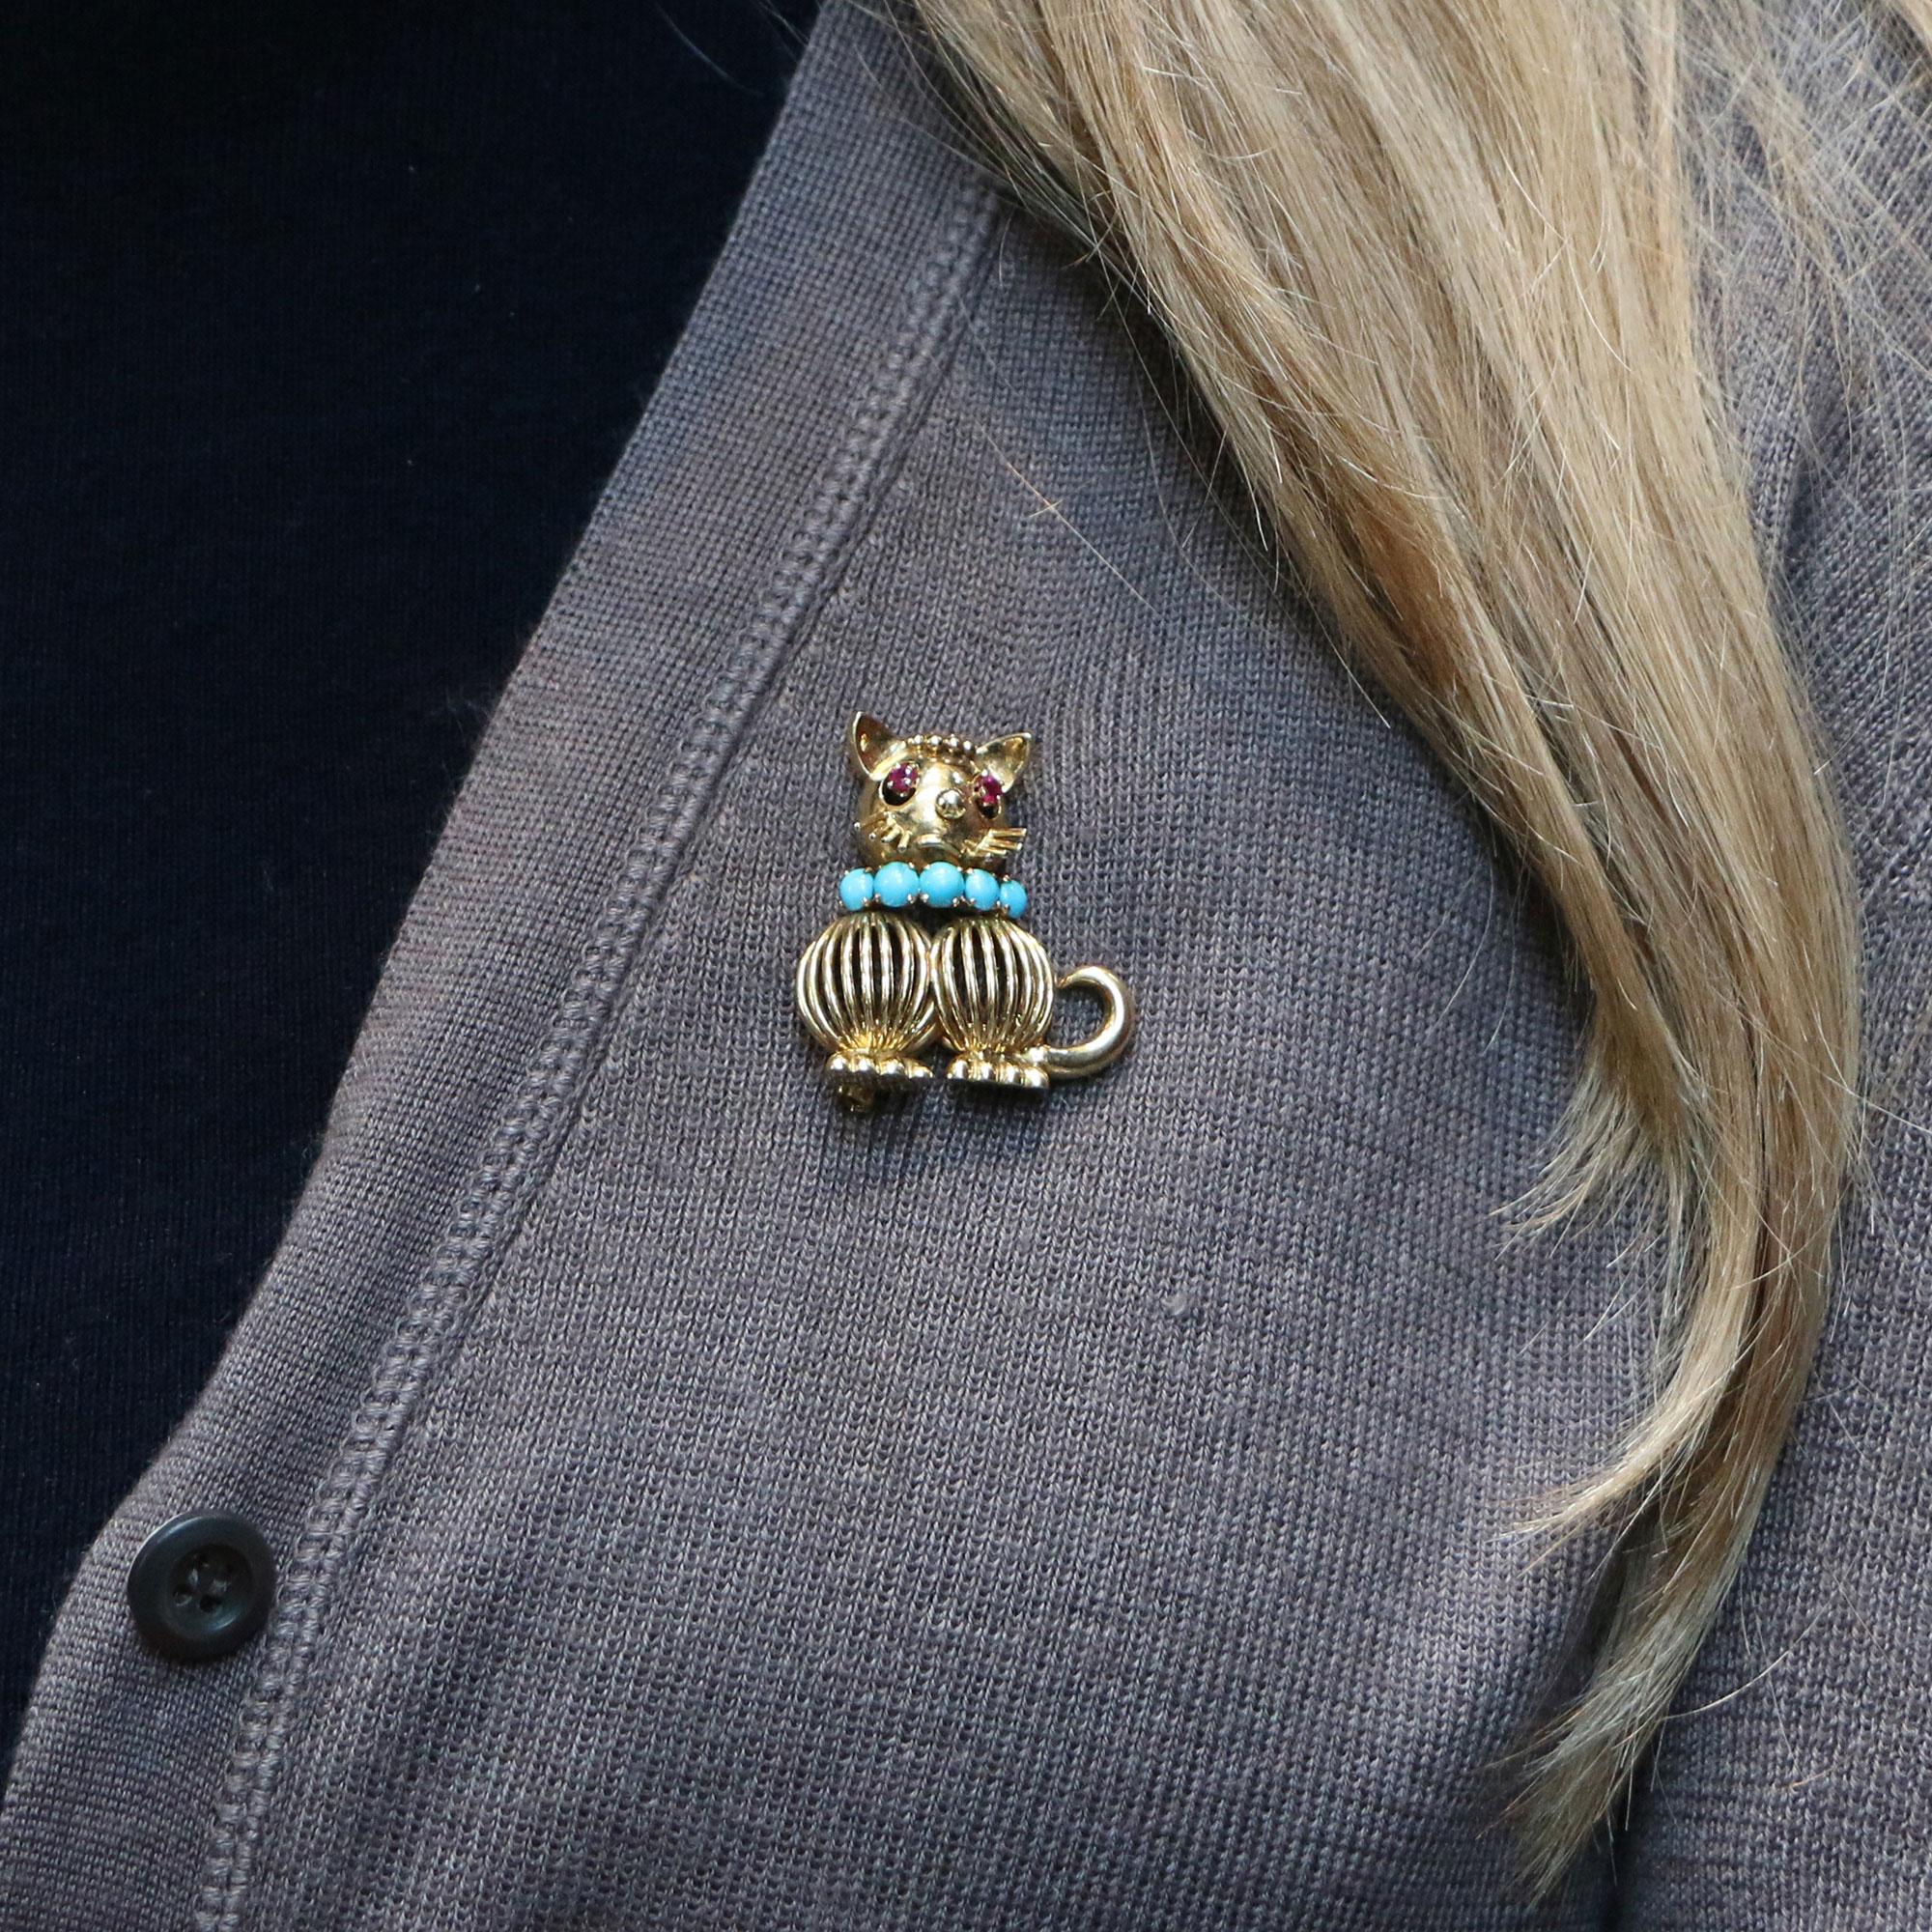 A quirky 1960's ruby and turquoise cat brooch by Hans Georg Mauntner, set in 18k yellow gold.

What immediately attracts your eye to this cute little cat is his brightly coloured blue turquoise collar. The collar is set with five equally sized round